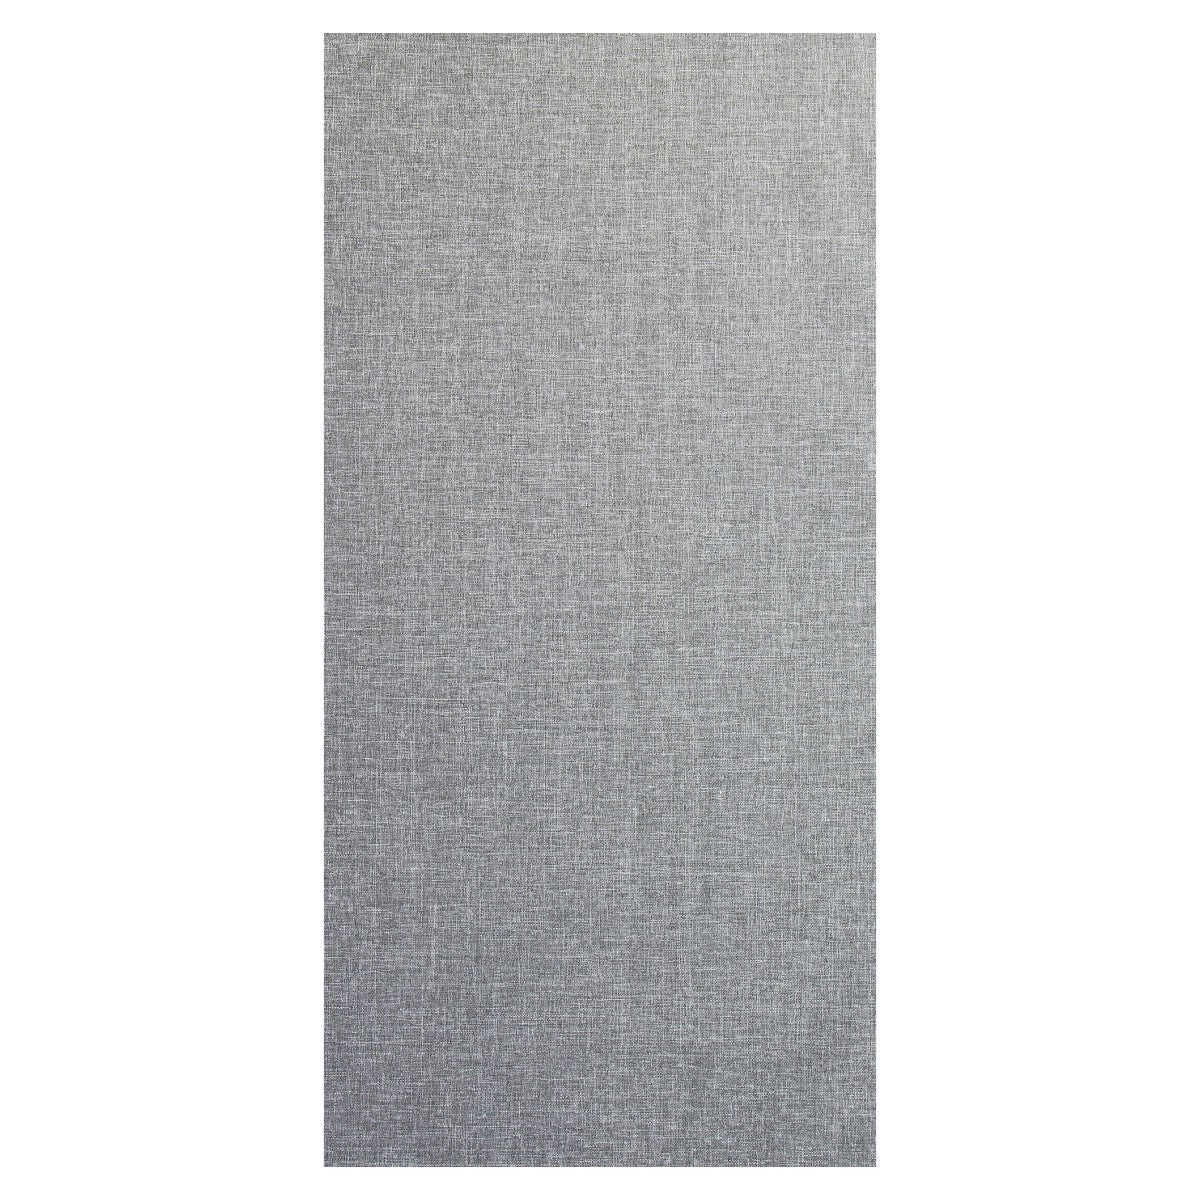 Primacoustic Broadway Fabric - Priced per linear ft - Gray - 54" Wide